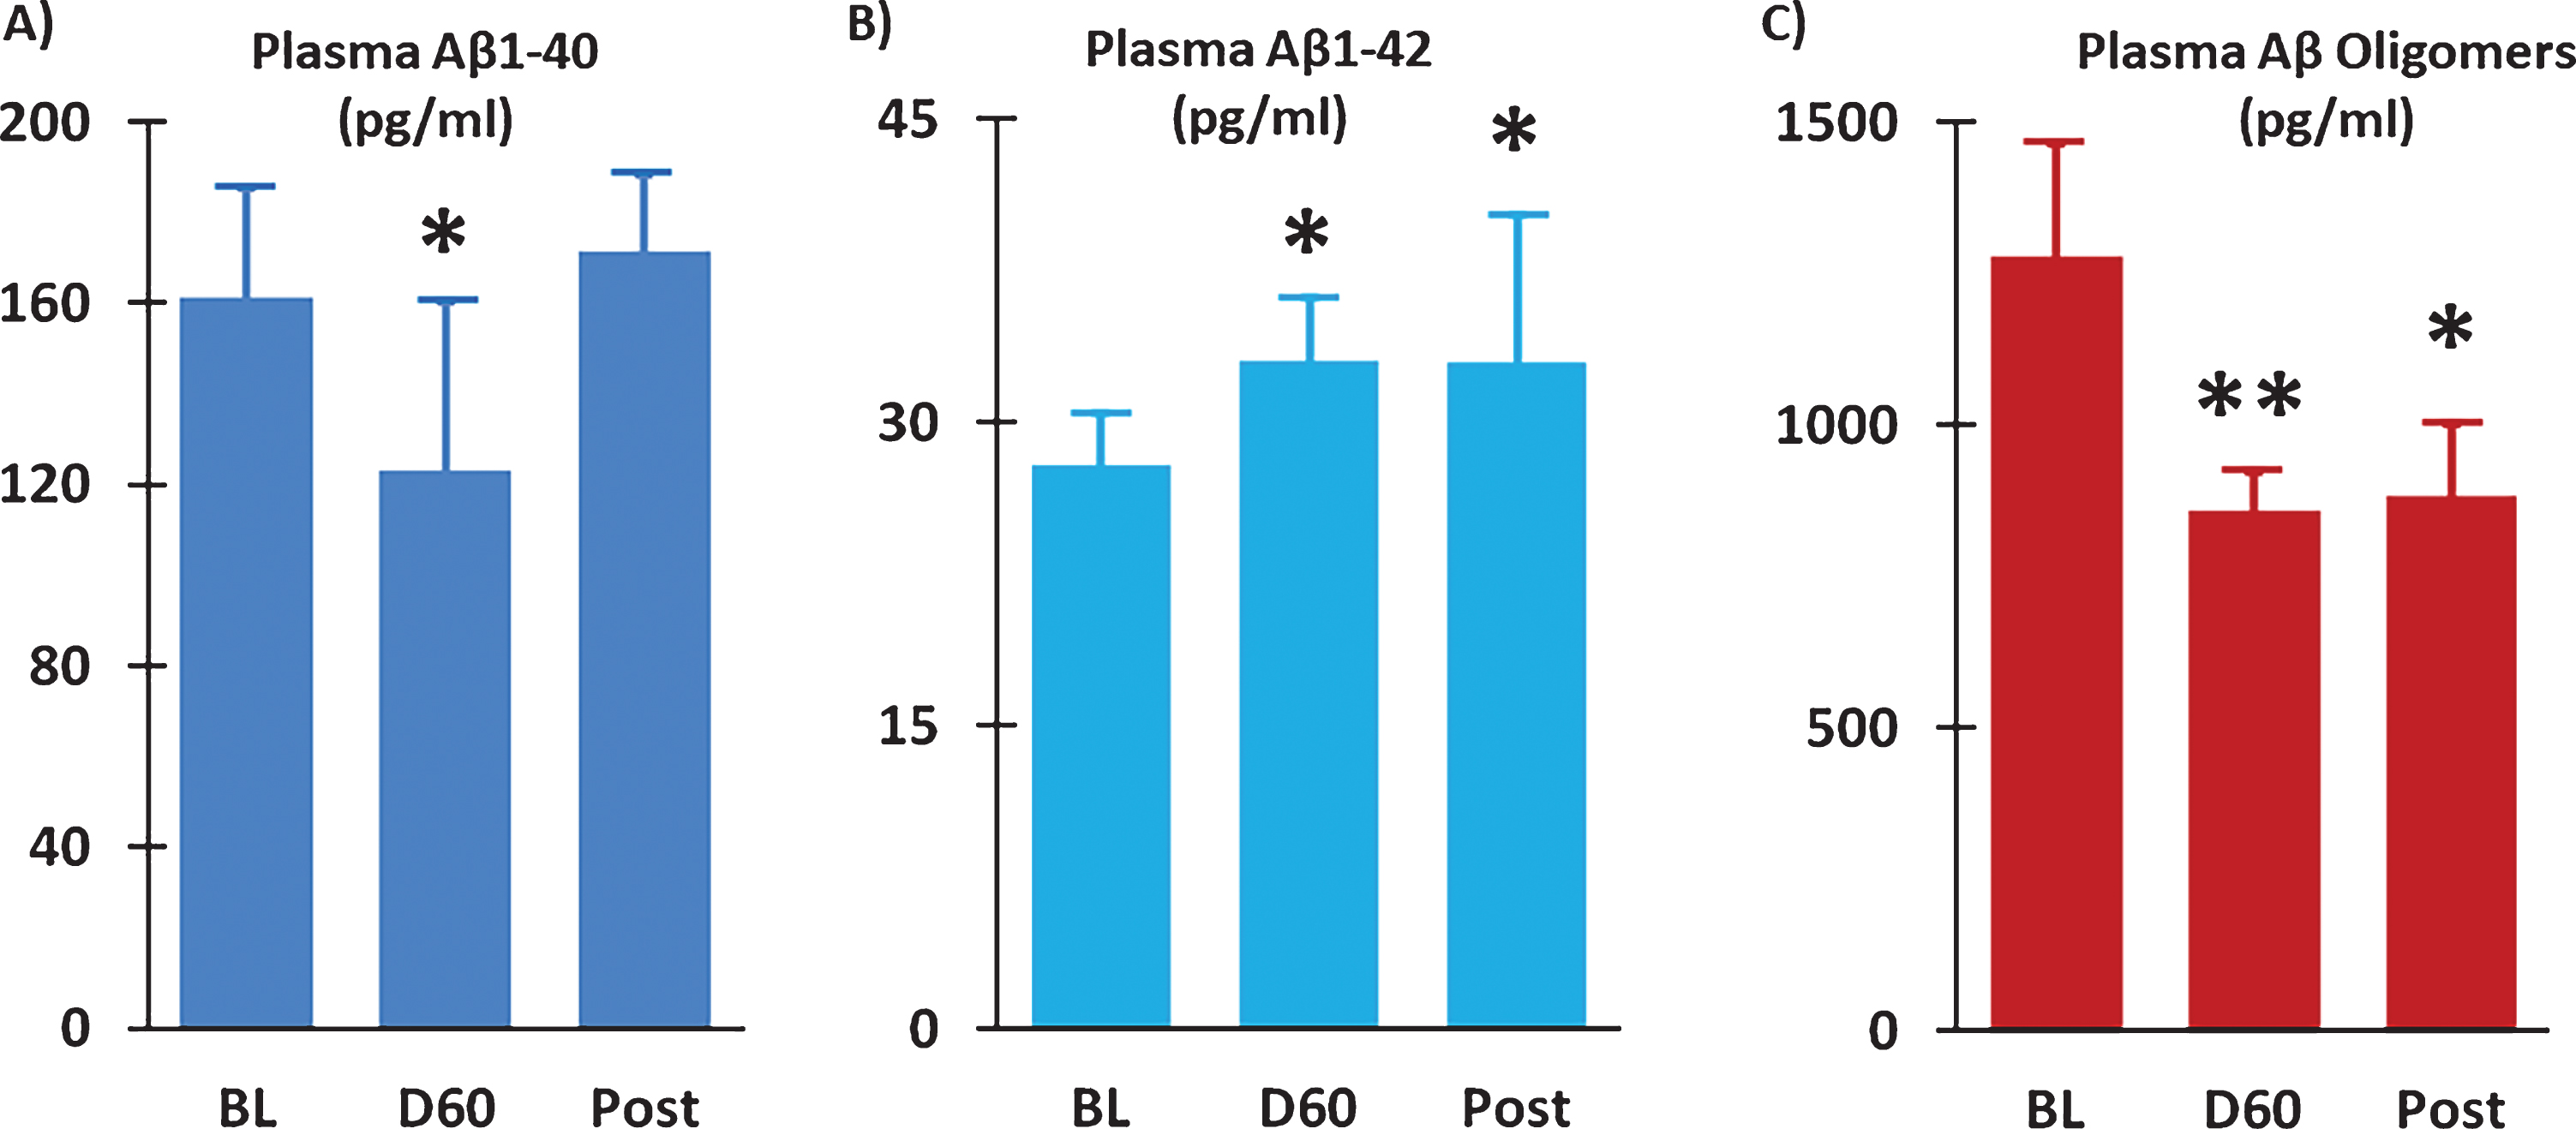 Plasma Aβ1-40 levels were reduced (A) and plasma Aβ1-42 levels were increased (B) following 2 months of TEMT administration (D60) compared to Baseline (BL). Levels of Aβ oligomers in plasma were substantially reduced after TEMT (D60), as well as 14 days thereafter (Post). Means±SEMs are presented. *ES significant at > 0.5 level versus BL; **ES significant at > 0.8 level versus BL.